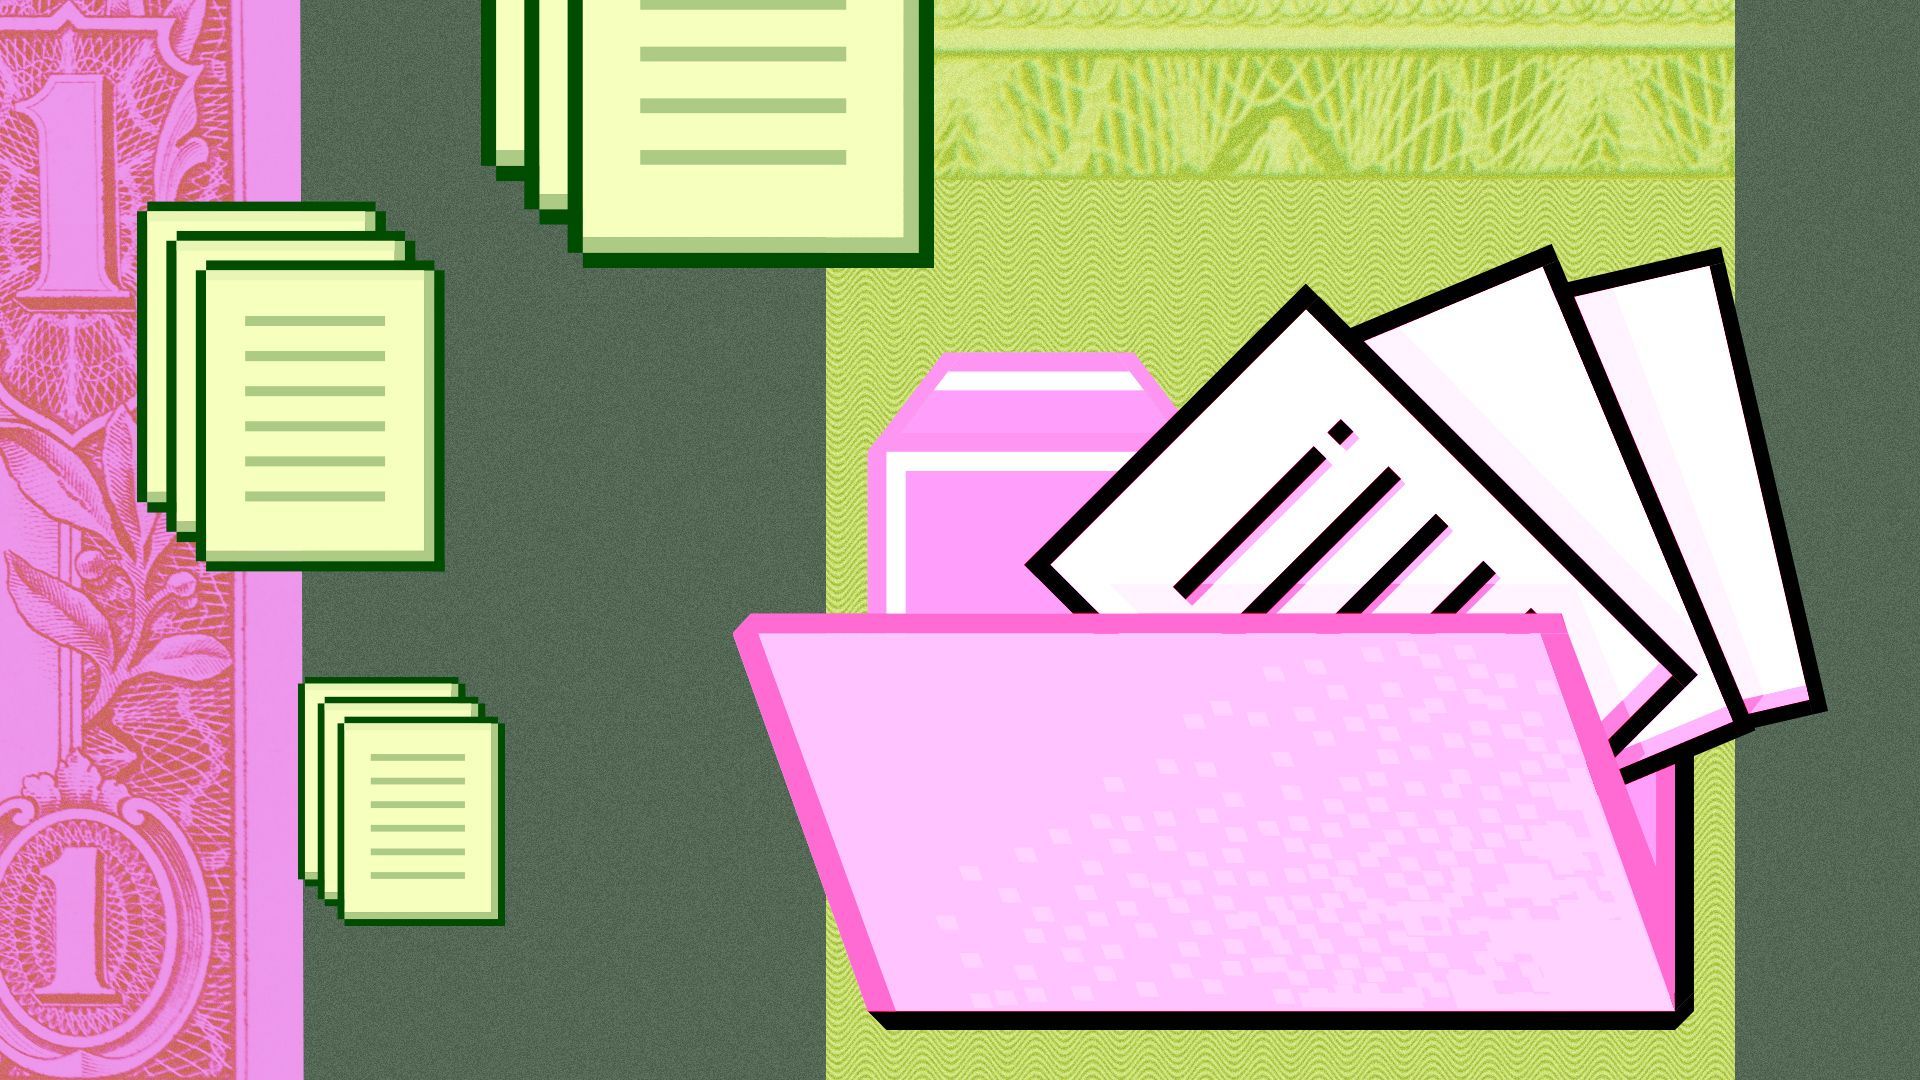 Illustration of a digital filing folder icon and digital document icons surrounded by money elements and abstract shapes.